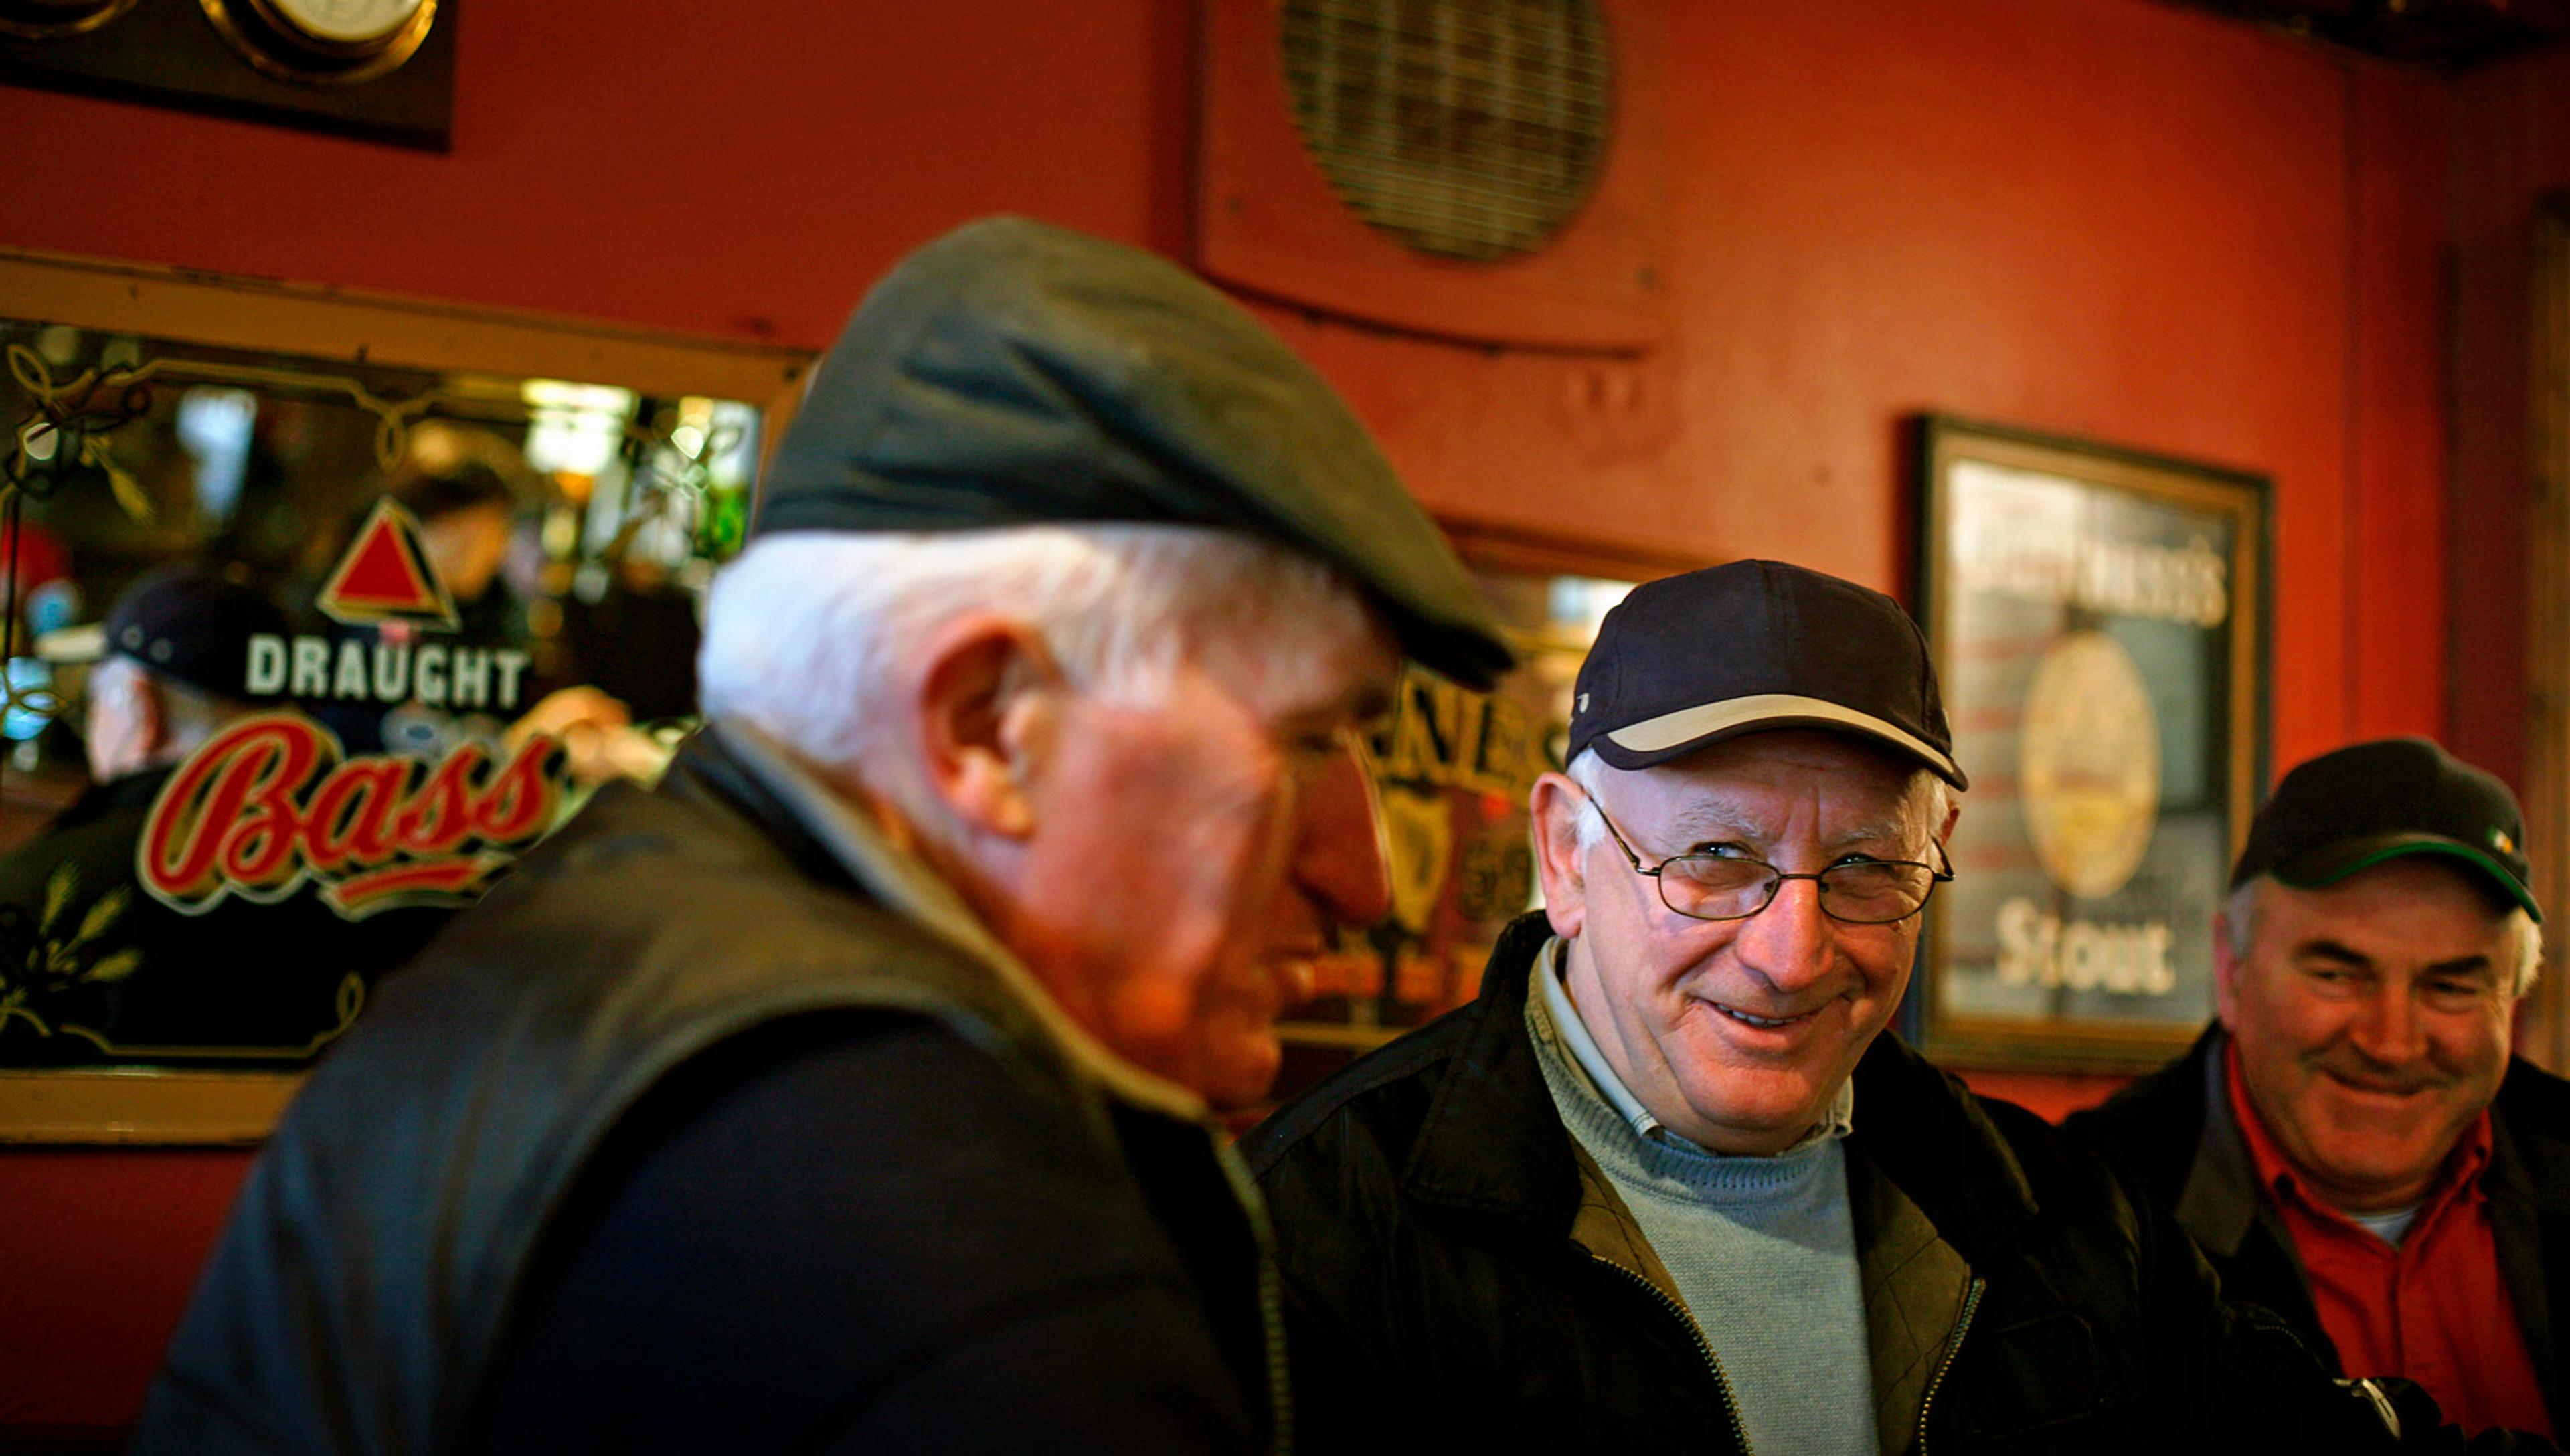 Three older men in cheerful mood are inside a bar or pub with painted red walls